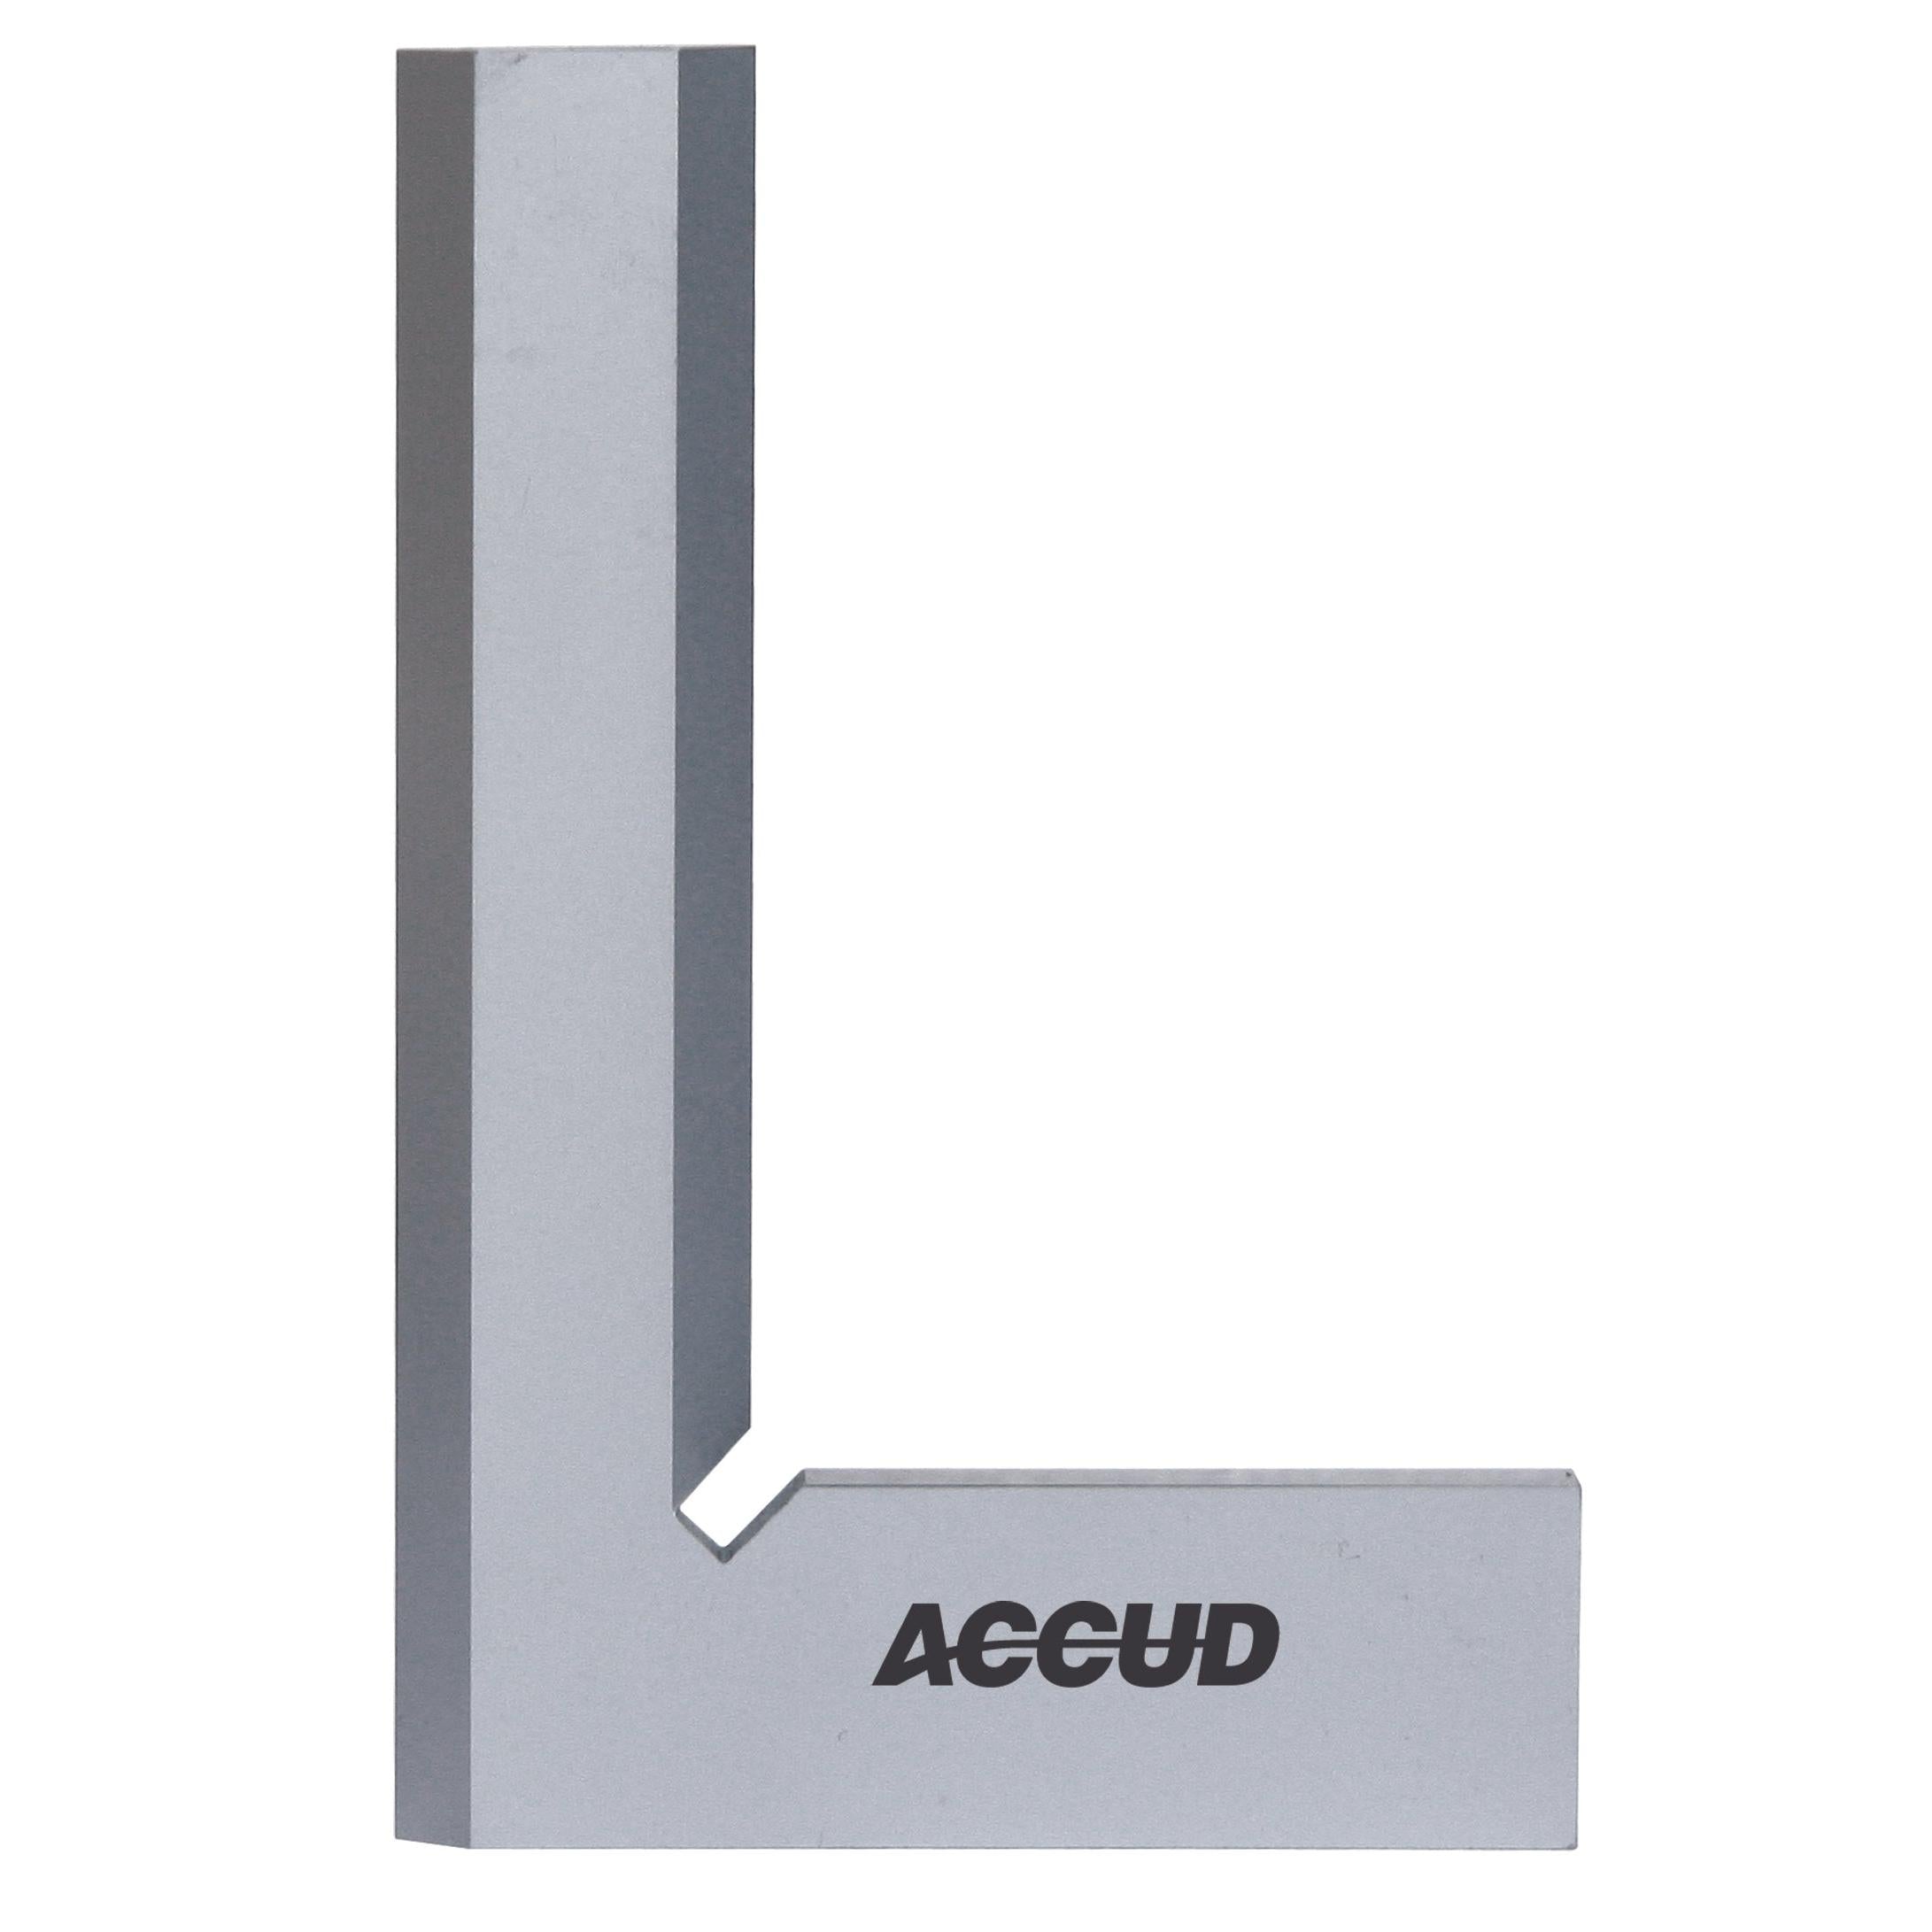 ACCUD | Beveled Edge Square 150X100Mm | 832-006-10 Power Tool Services